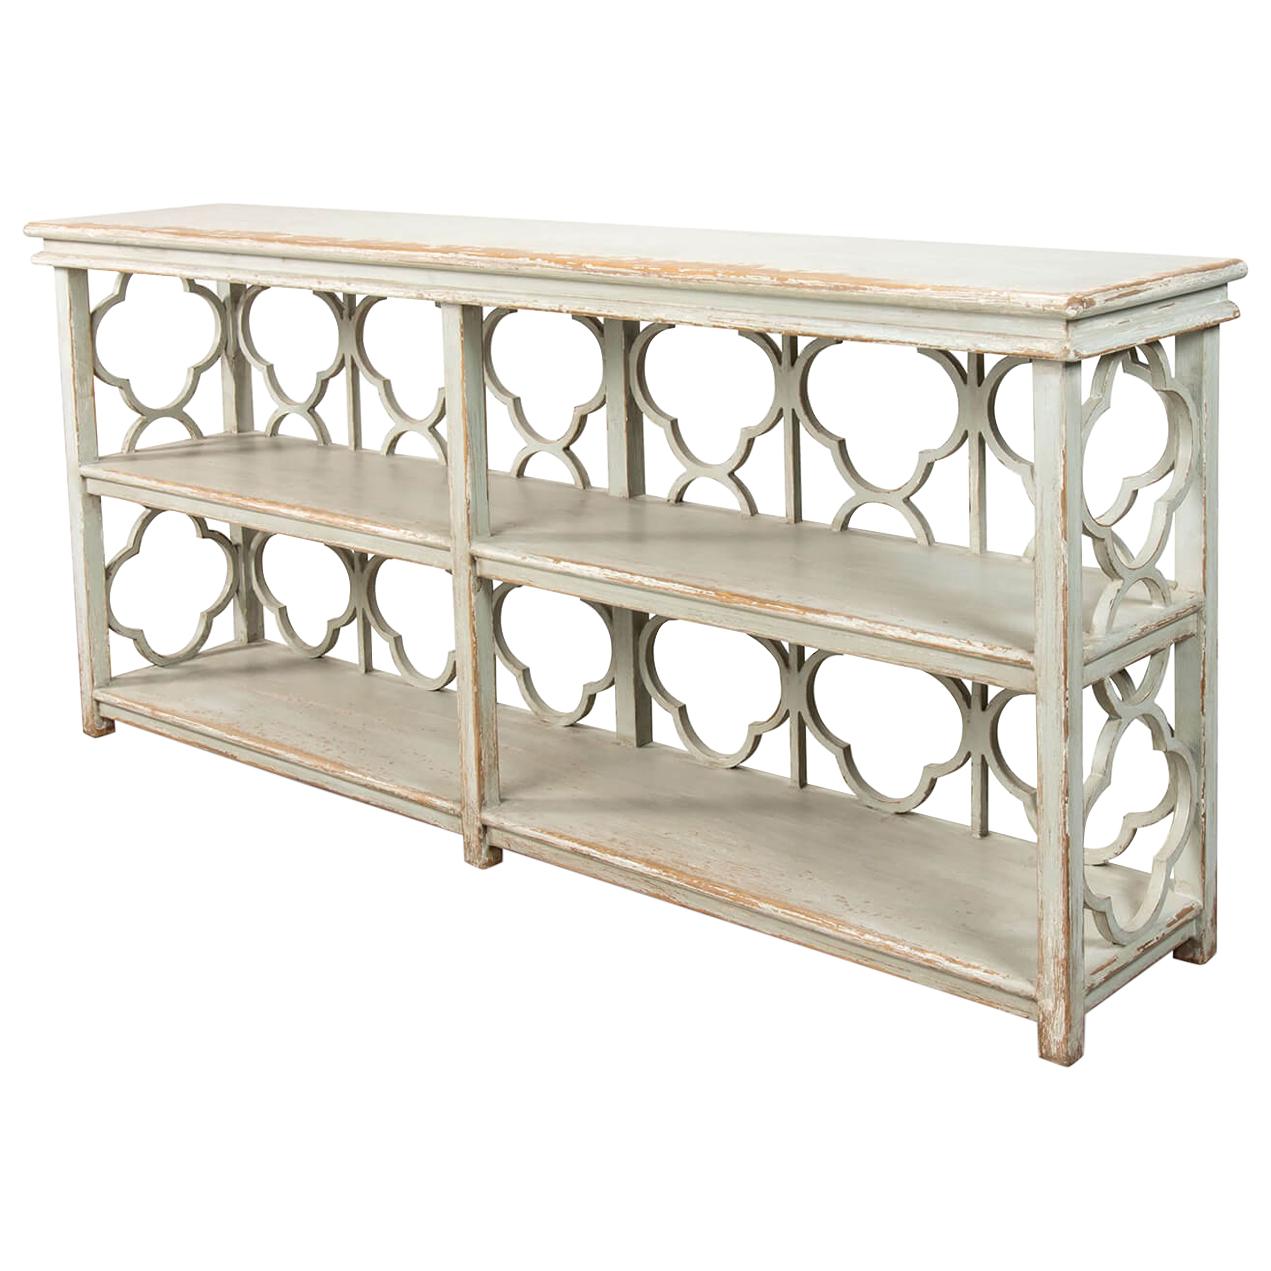 Country Painted Quatrefoil Bookcase For Sale